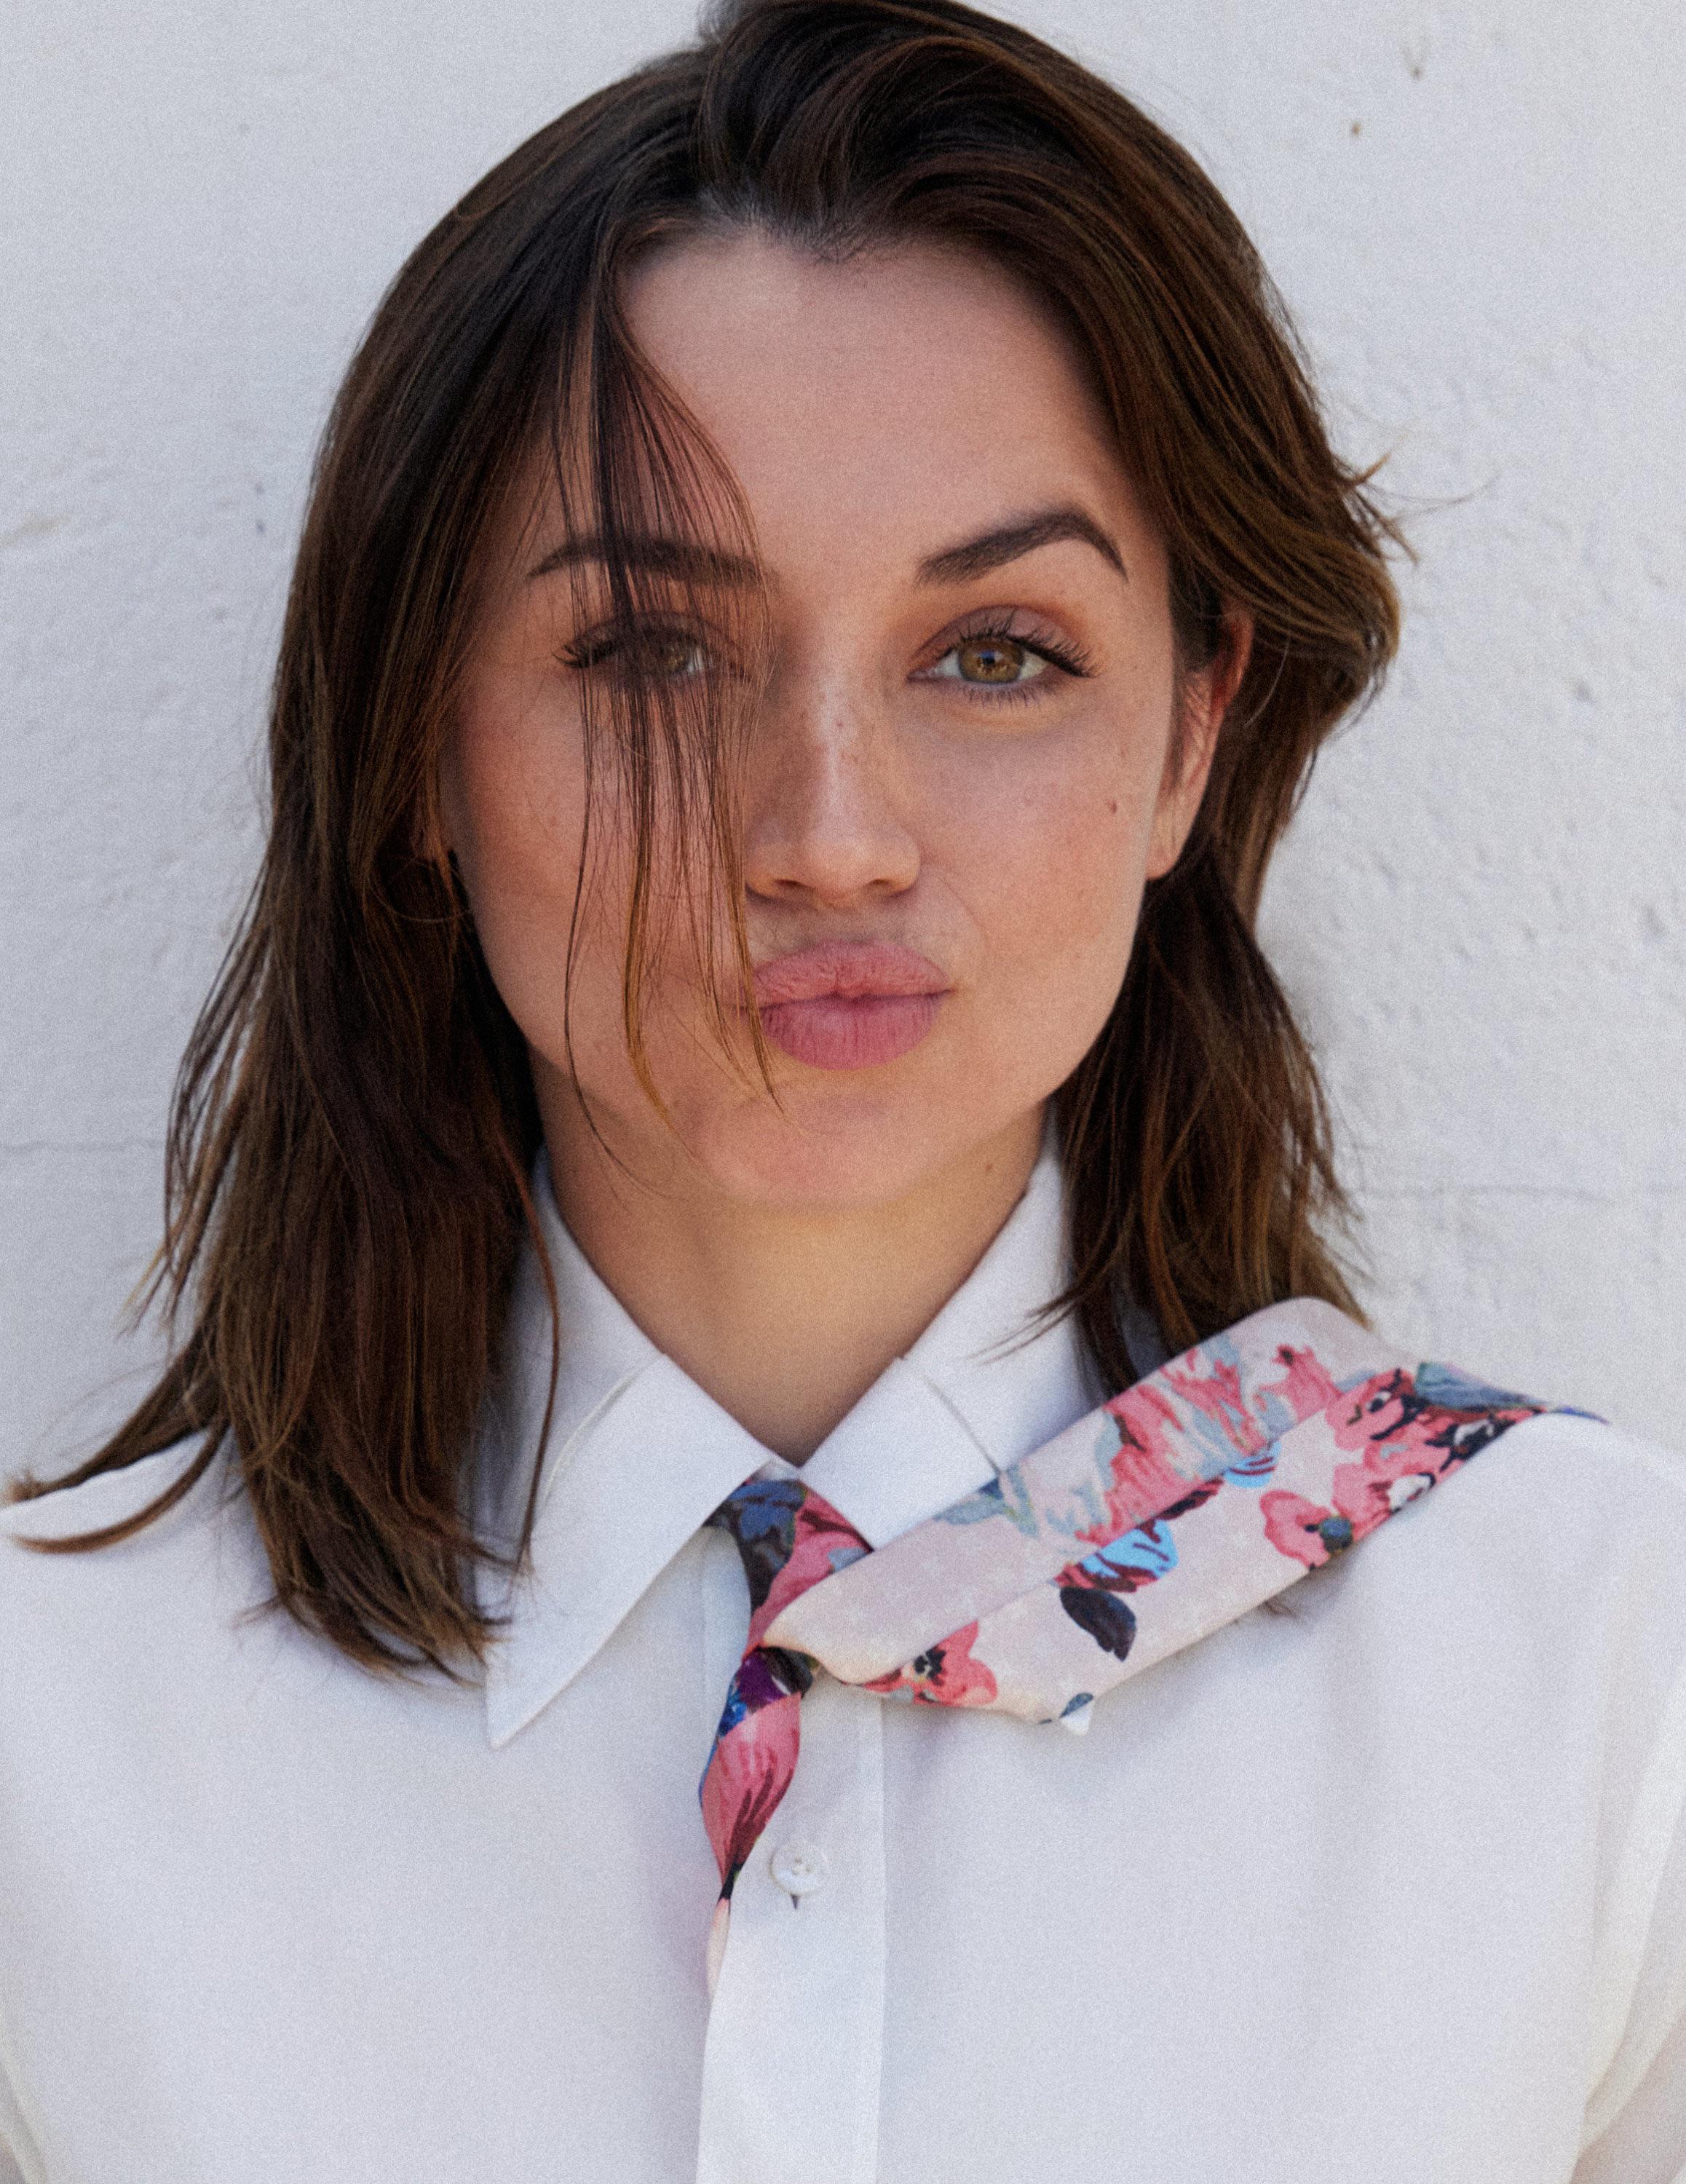 People 2316x3000 Ana de Armas actress looking at viewer brunette white shirt tie women portrait display simple background pouting hair over one eye